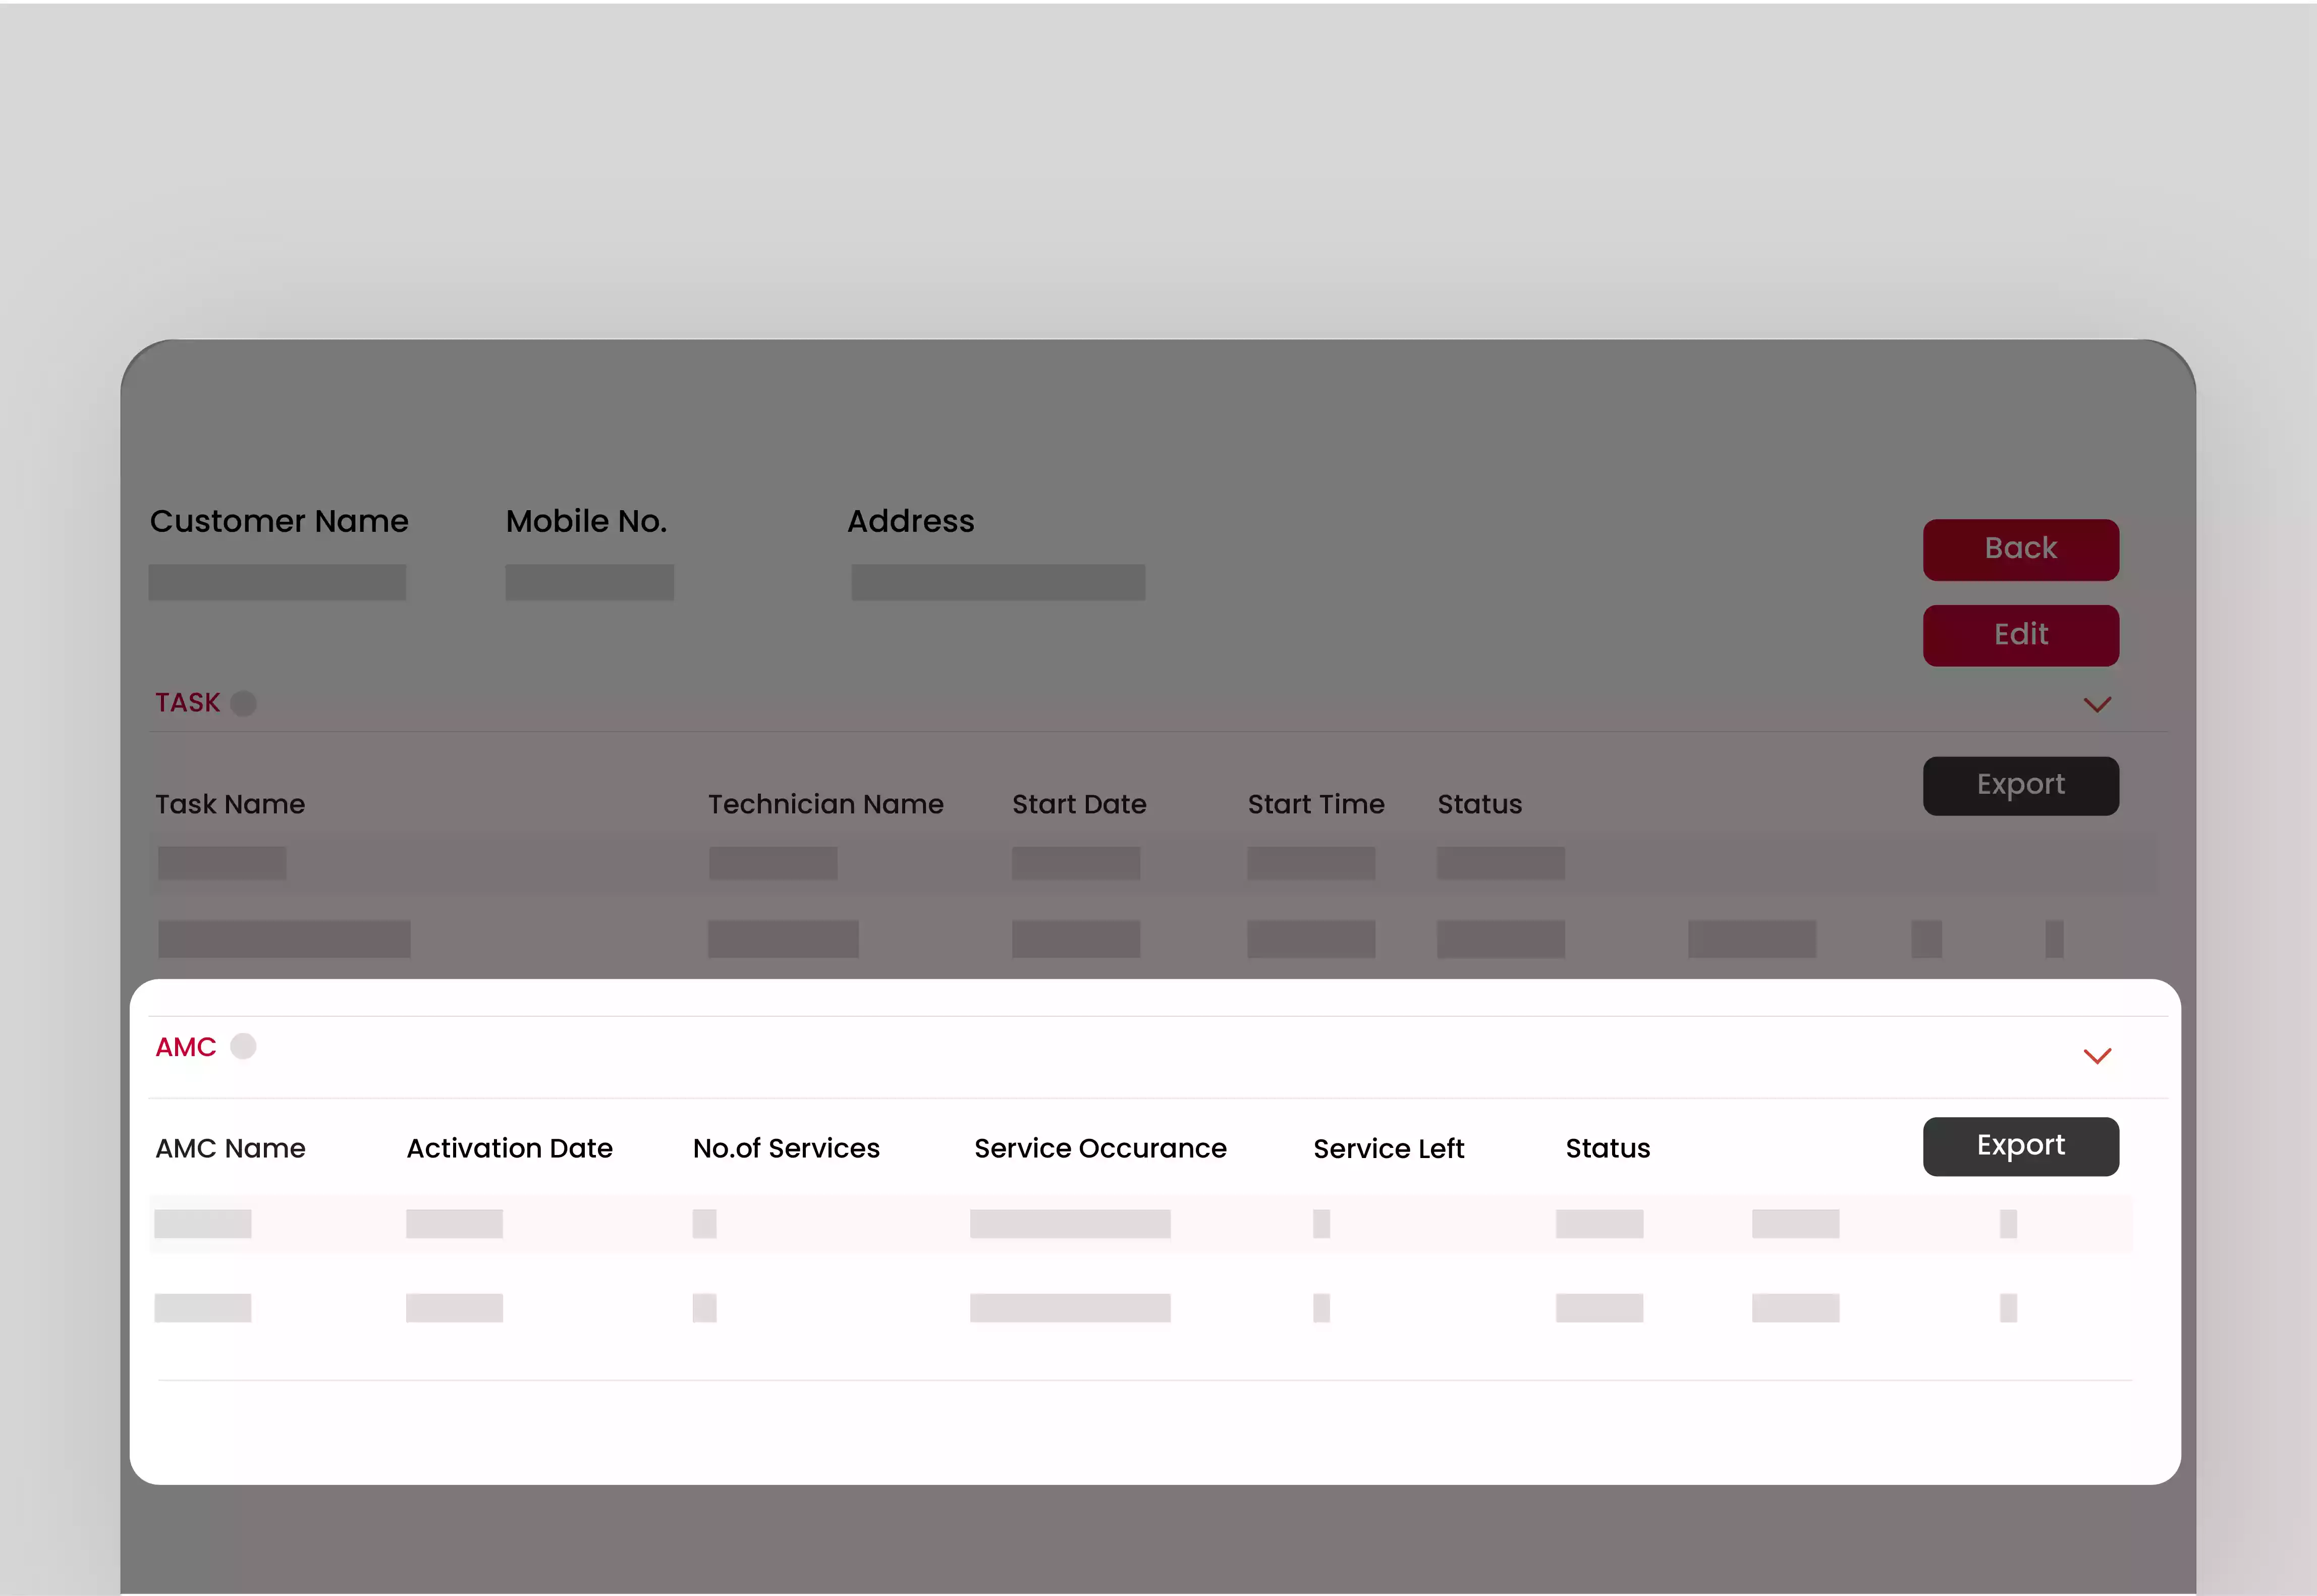 The image shows the Customer profile page opened in the background the AMC option has been highlighted and the required details have been asked.